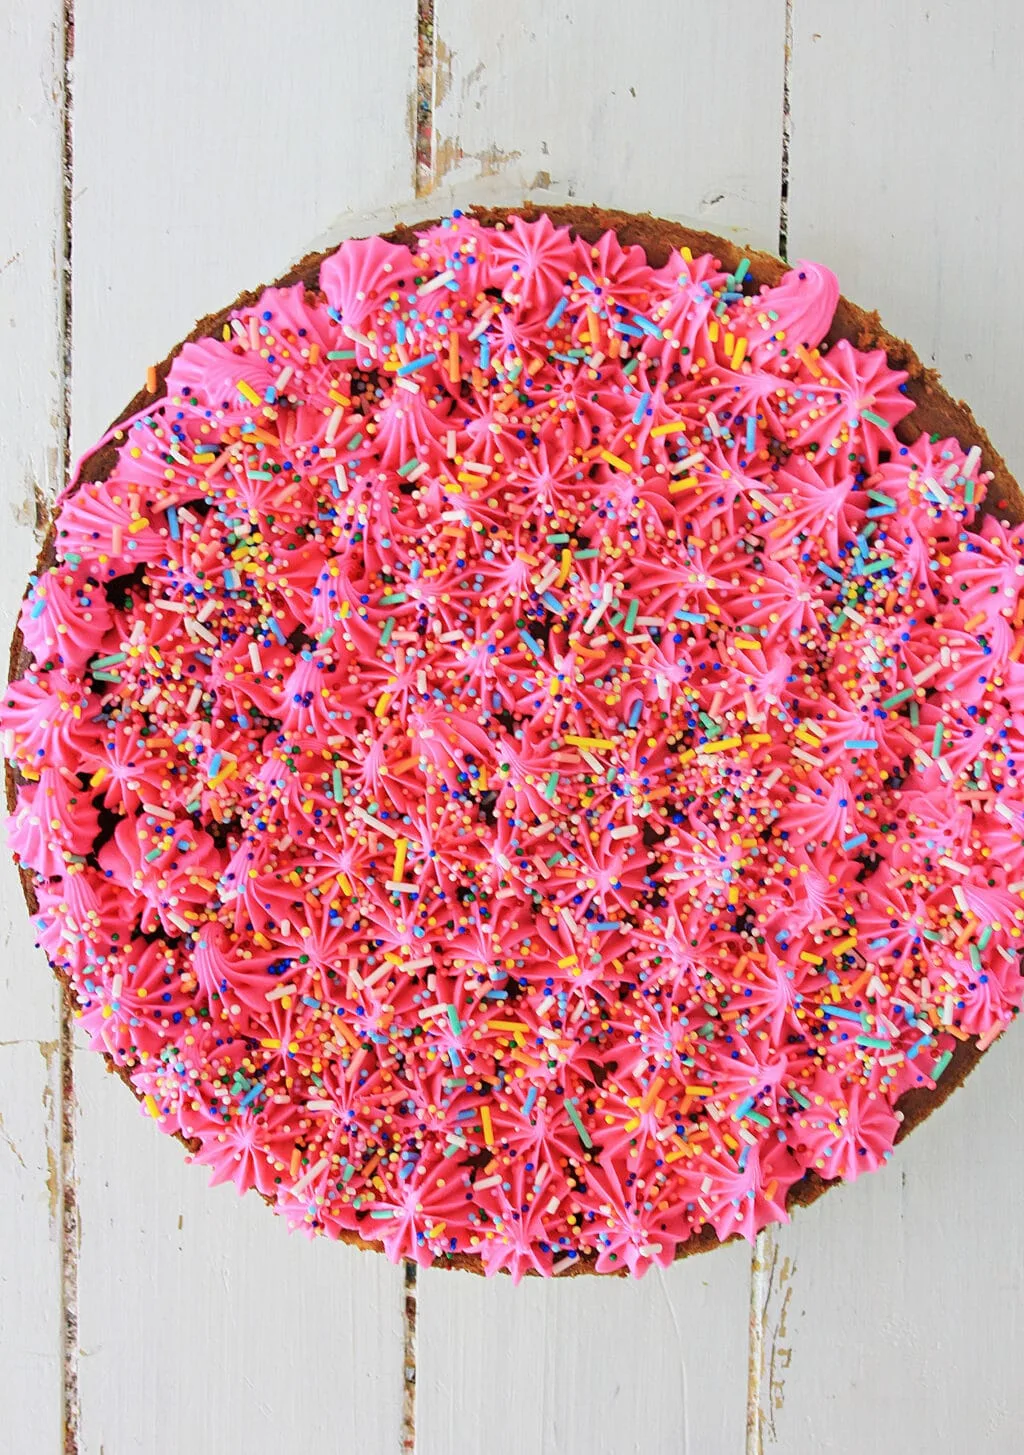 A top view of cheesecake with hot pink frosting and rainbow sprinkles